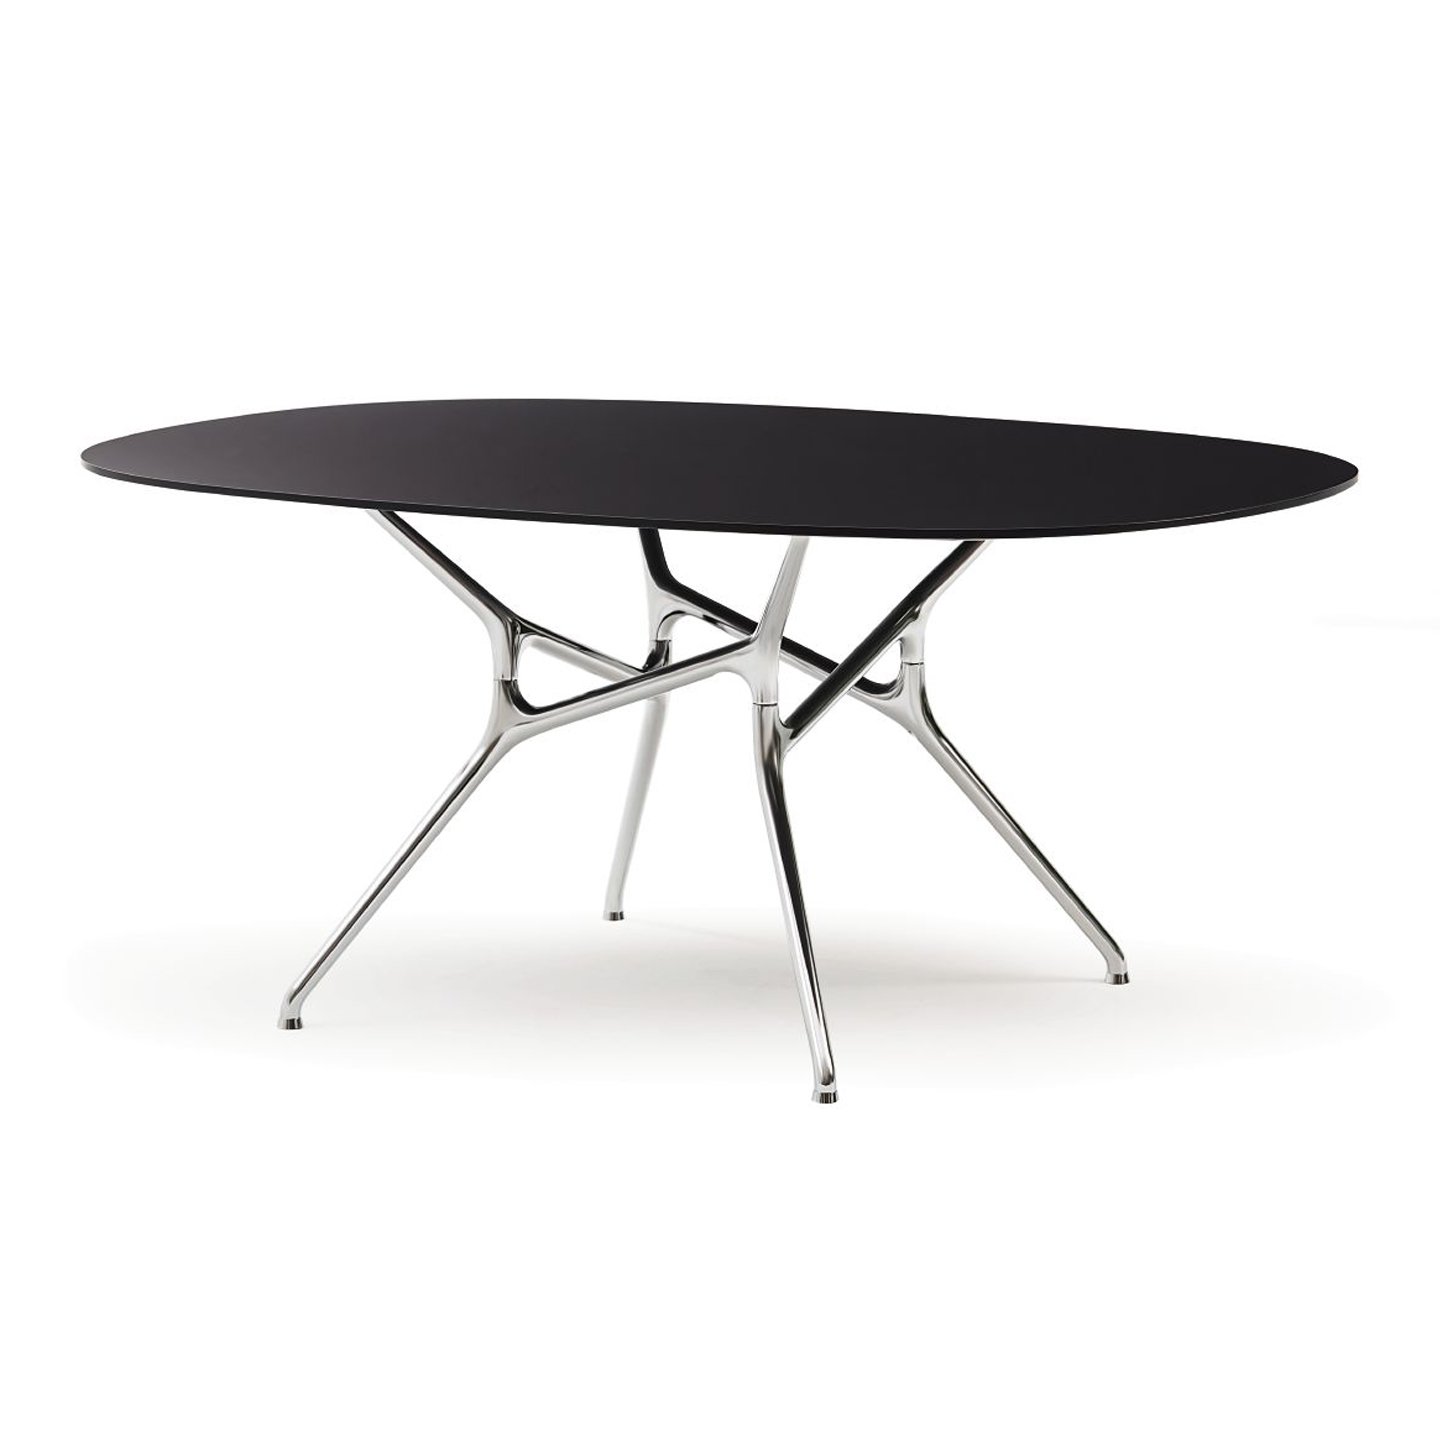 Haworth Branch table with matte black top and 4 aluminum legs